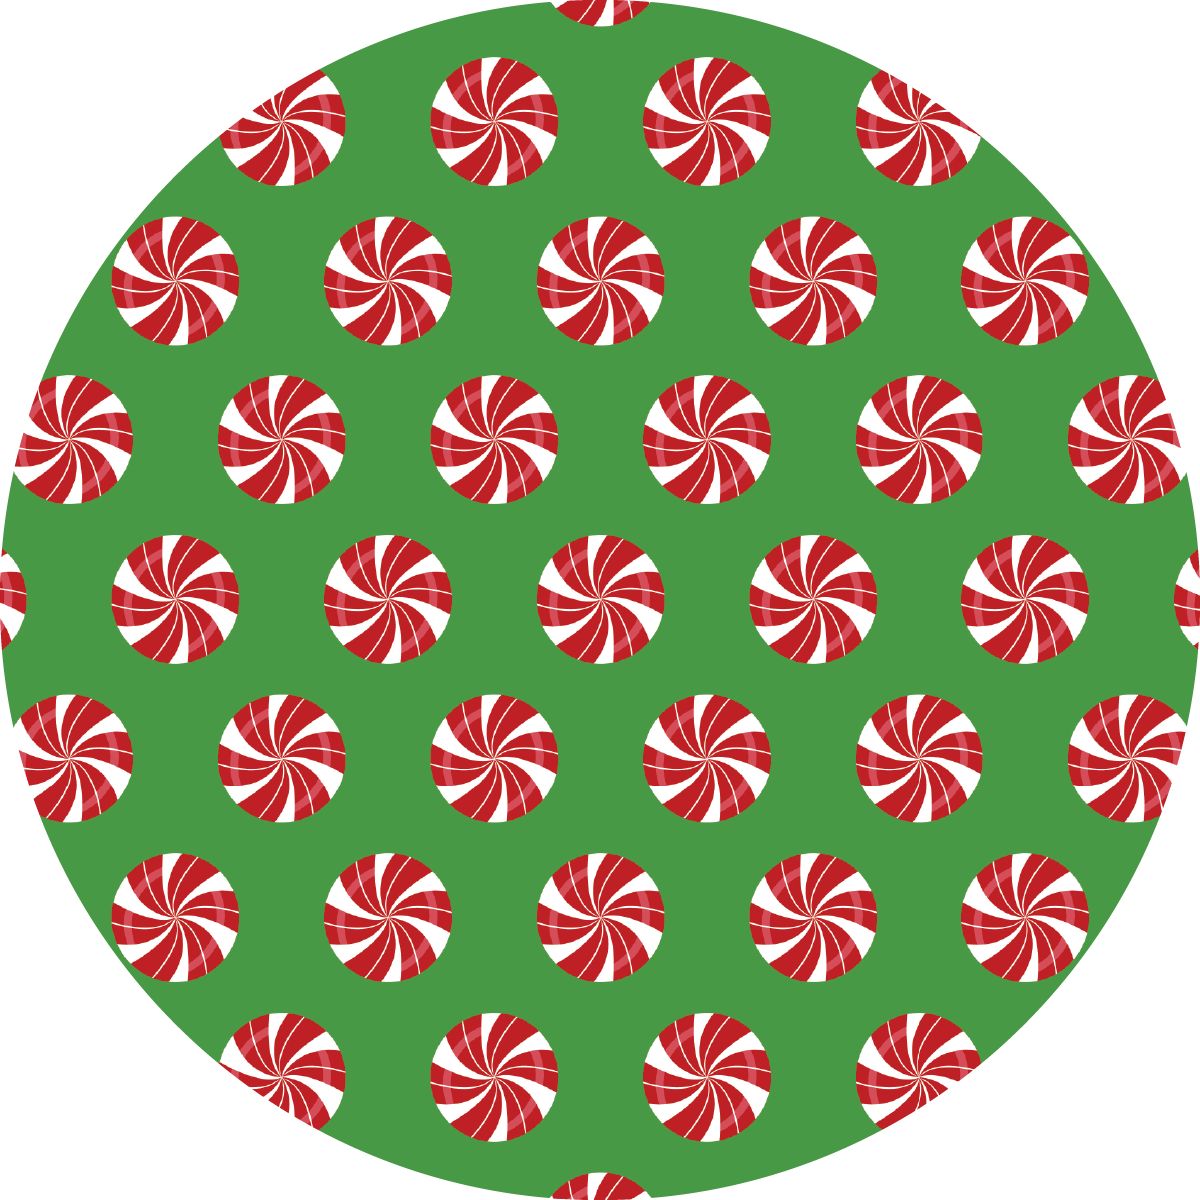 #6 Peppermints Christmas Ornament Backing Sticker - Supply for Making Custom Ornaments